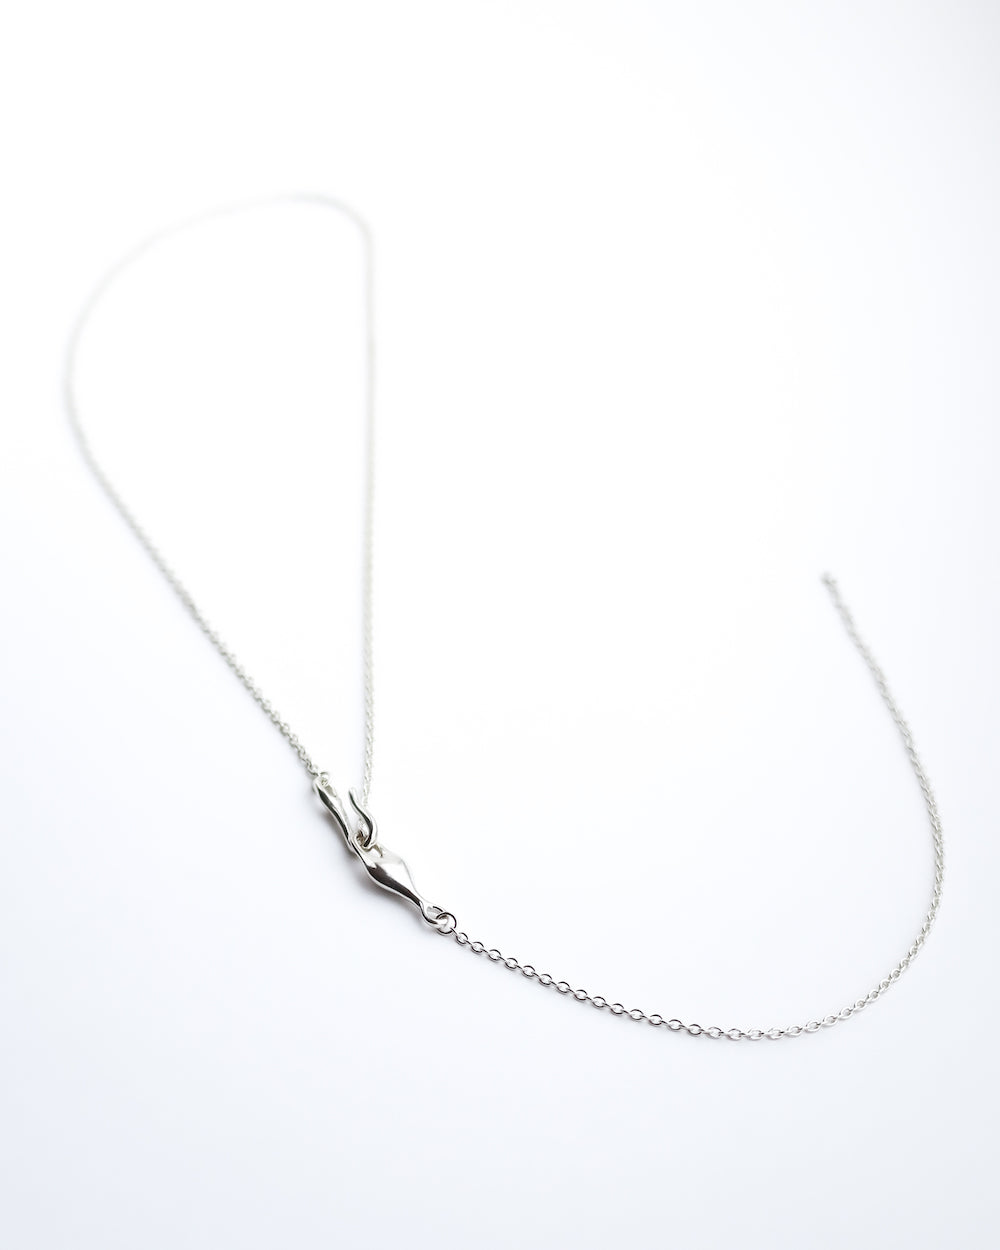 LEAF CLASP LINED NECKLACE